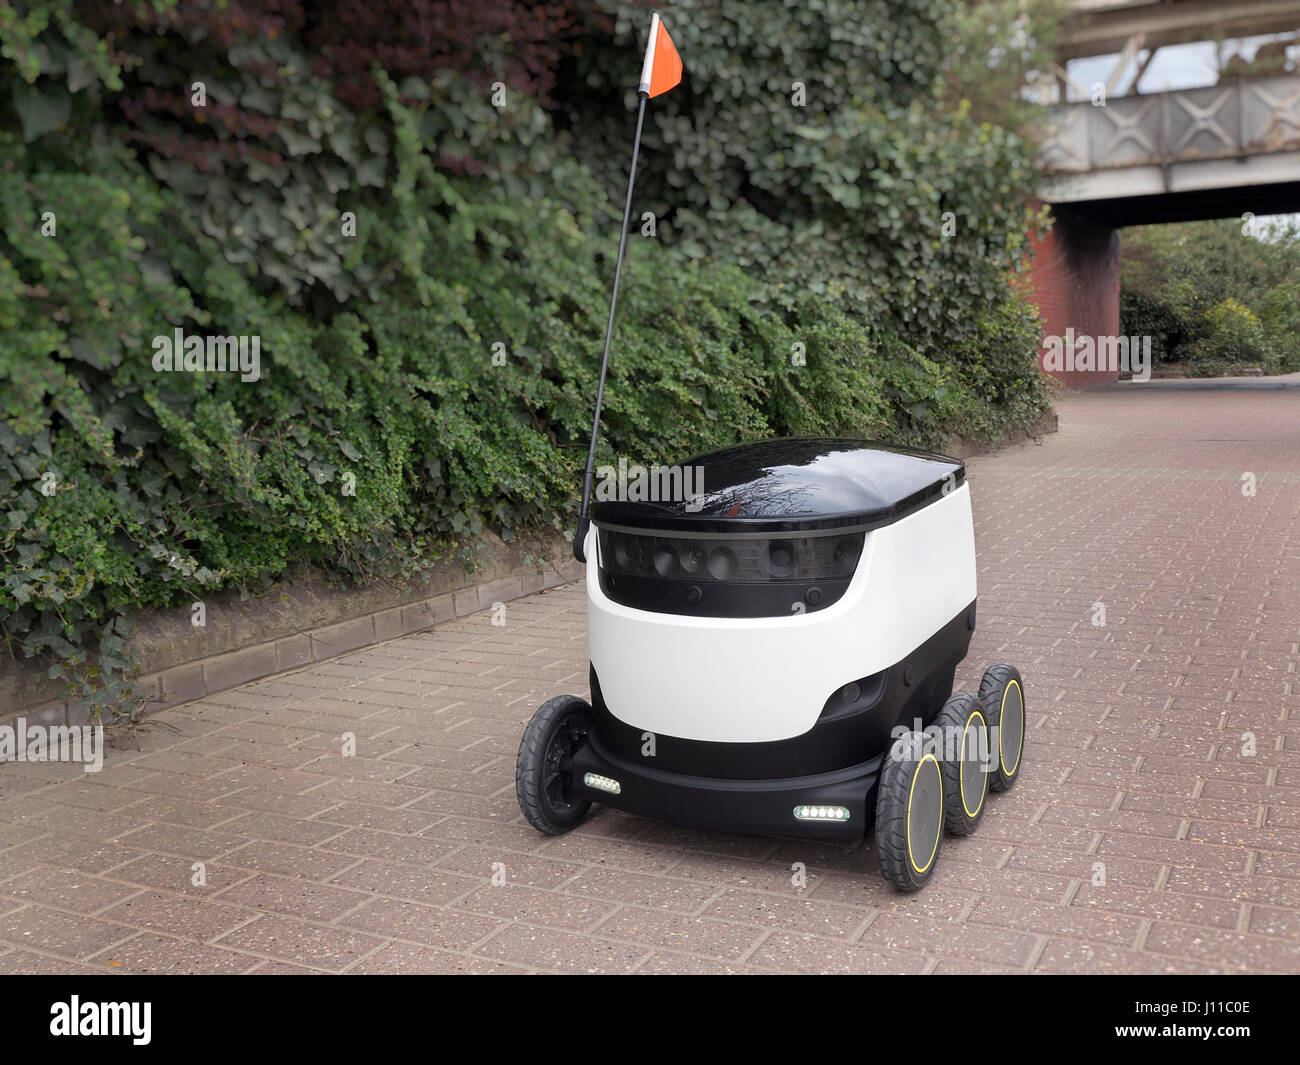 Skyship delivery robot on test in Greenwich London UK Stock Photo